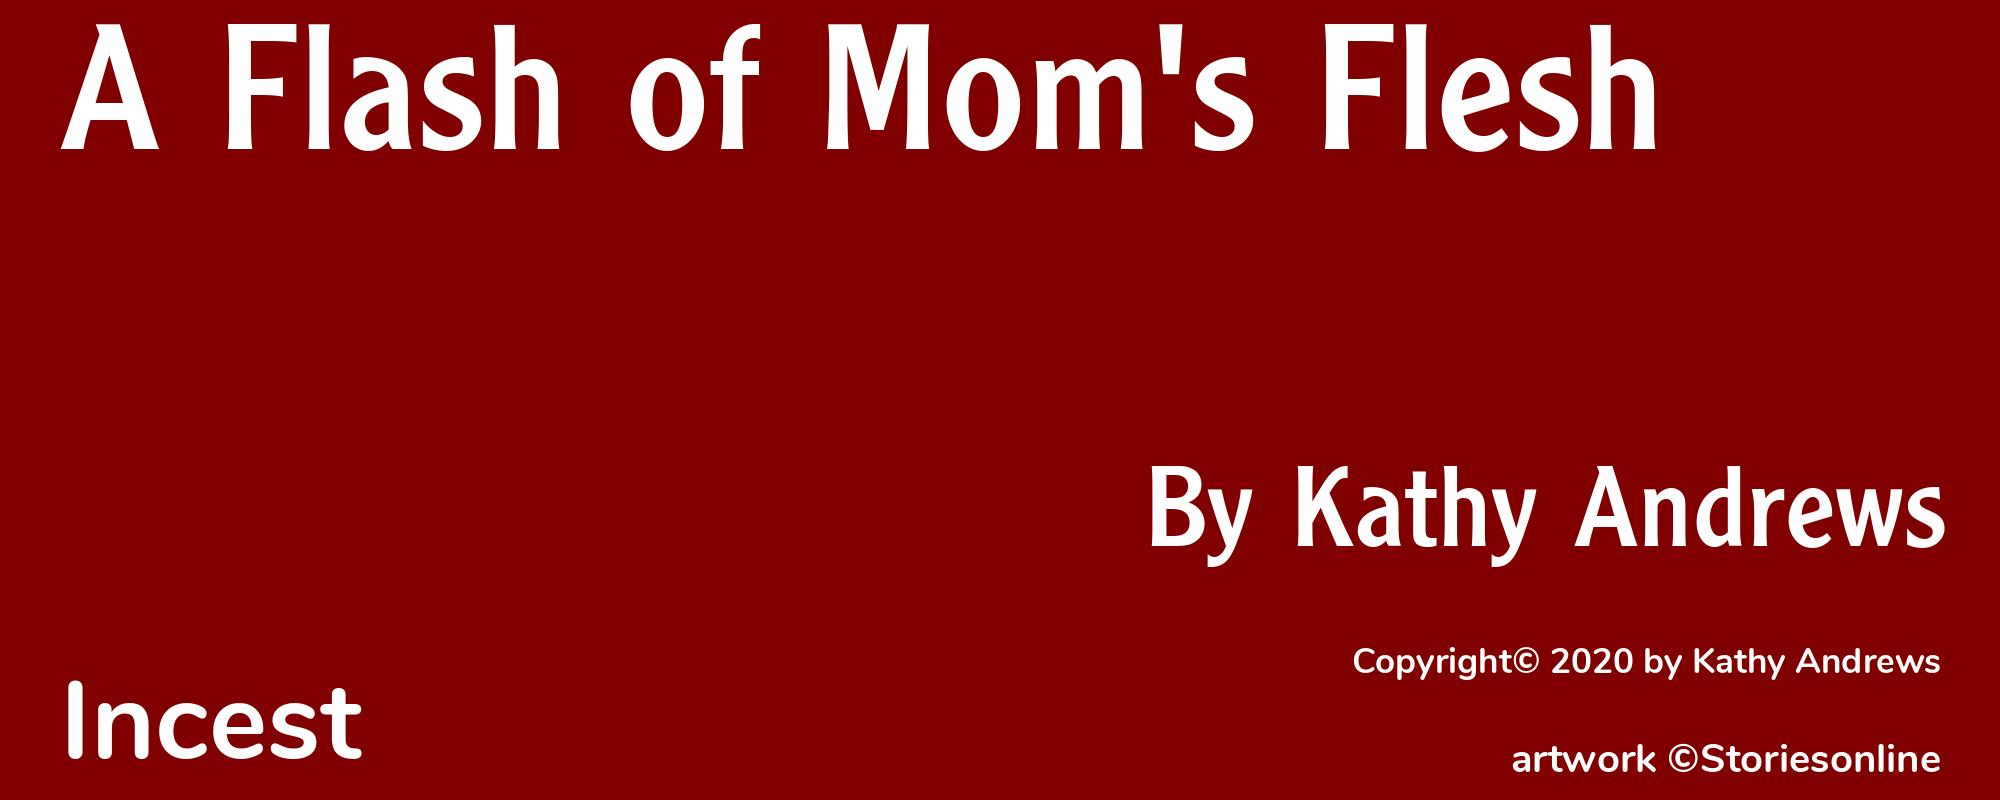 A Flash of Mom's Flesh - Cover